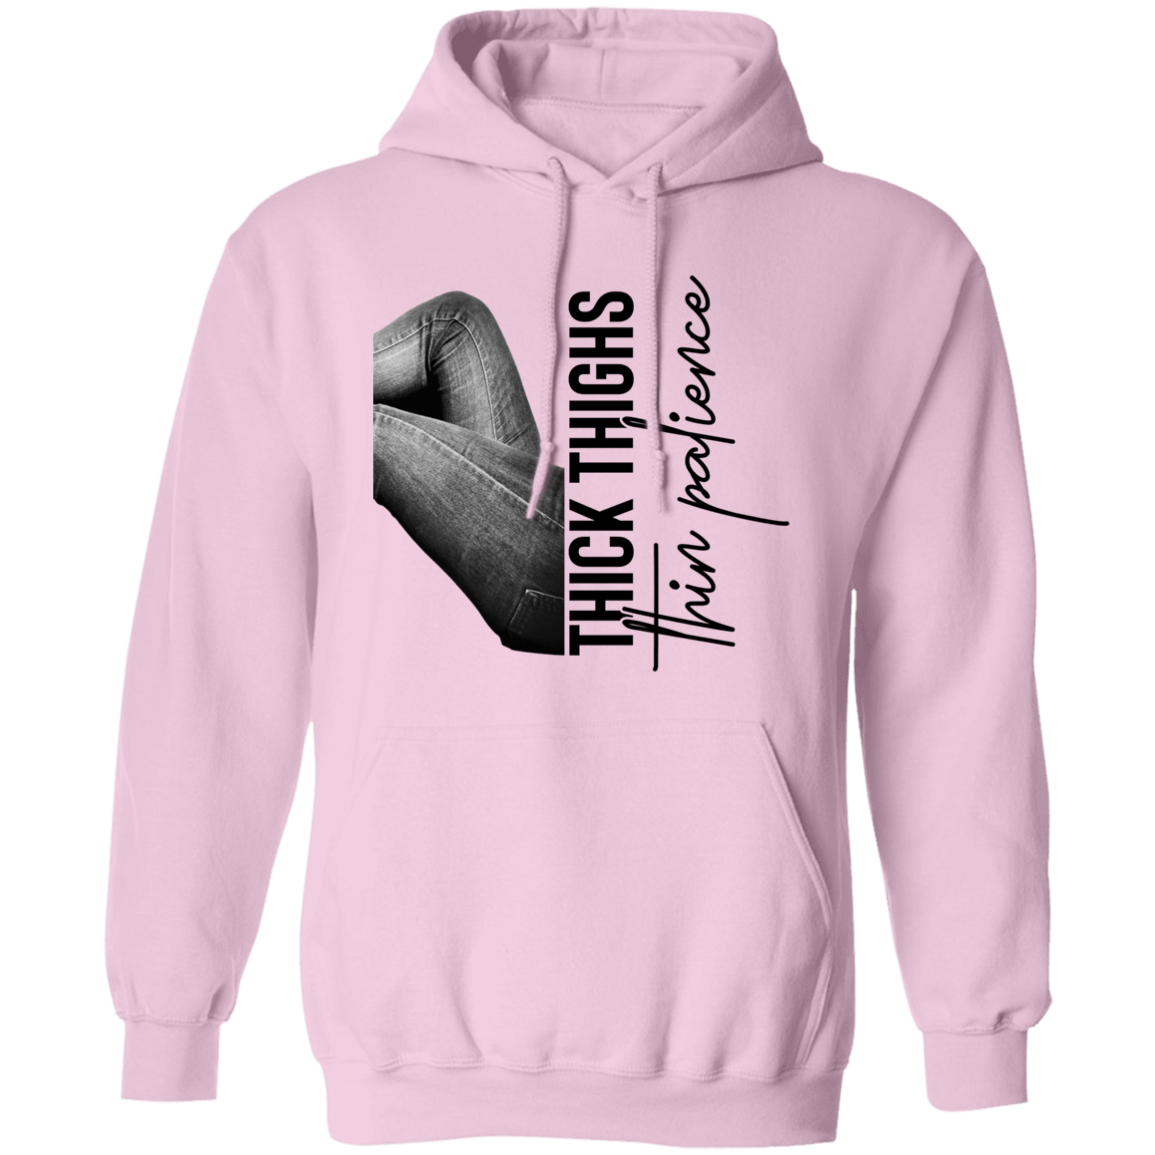 THICK THIGHS THIN PATIENCE PULLOVER HOODIE